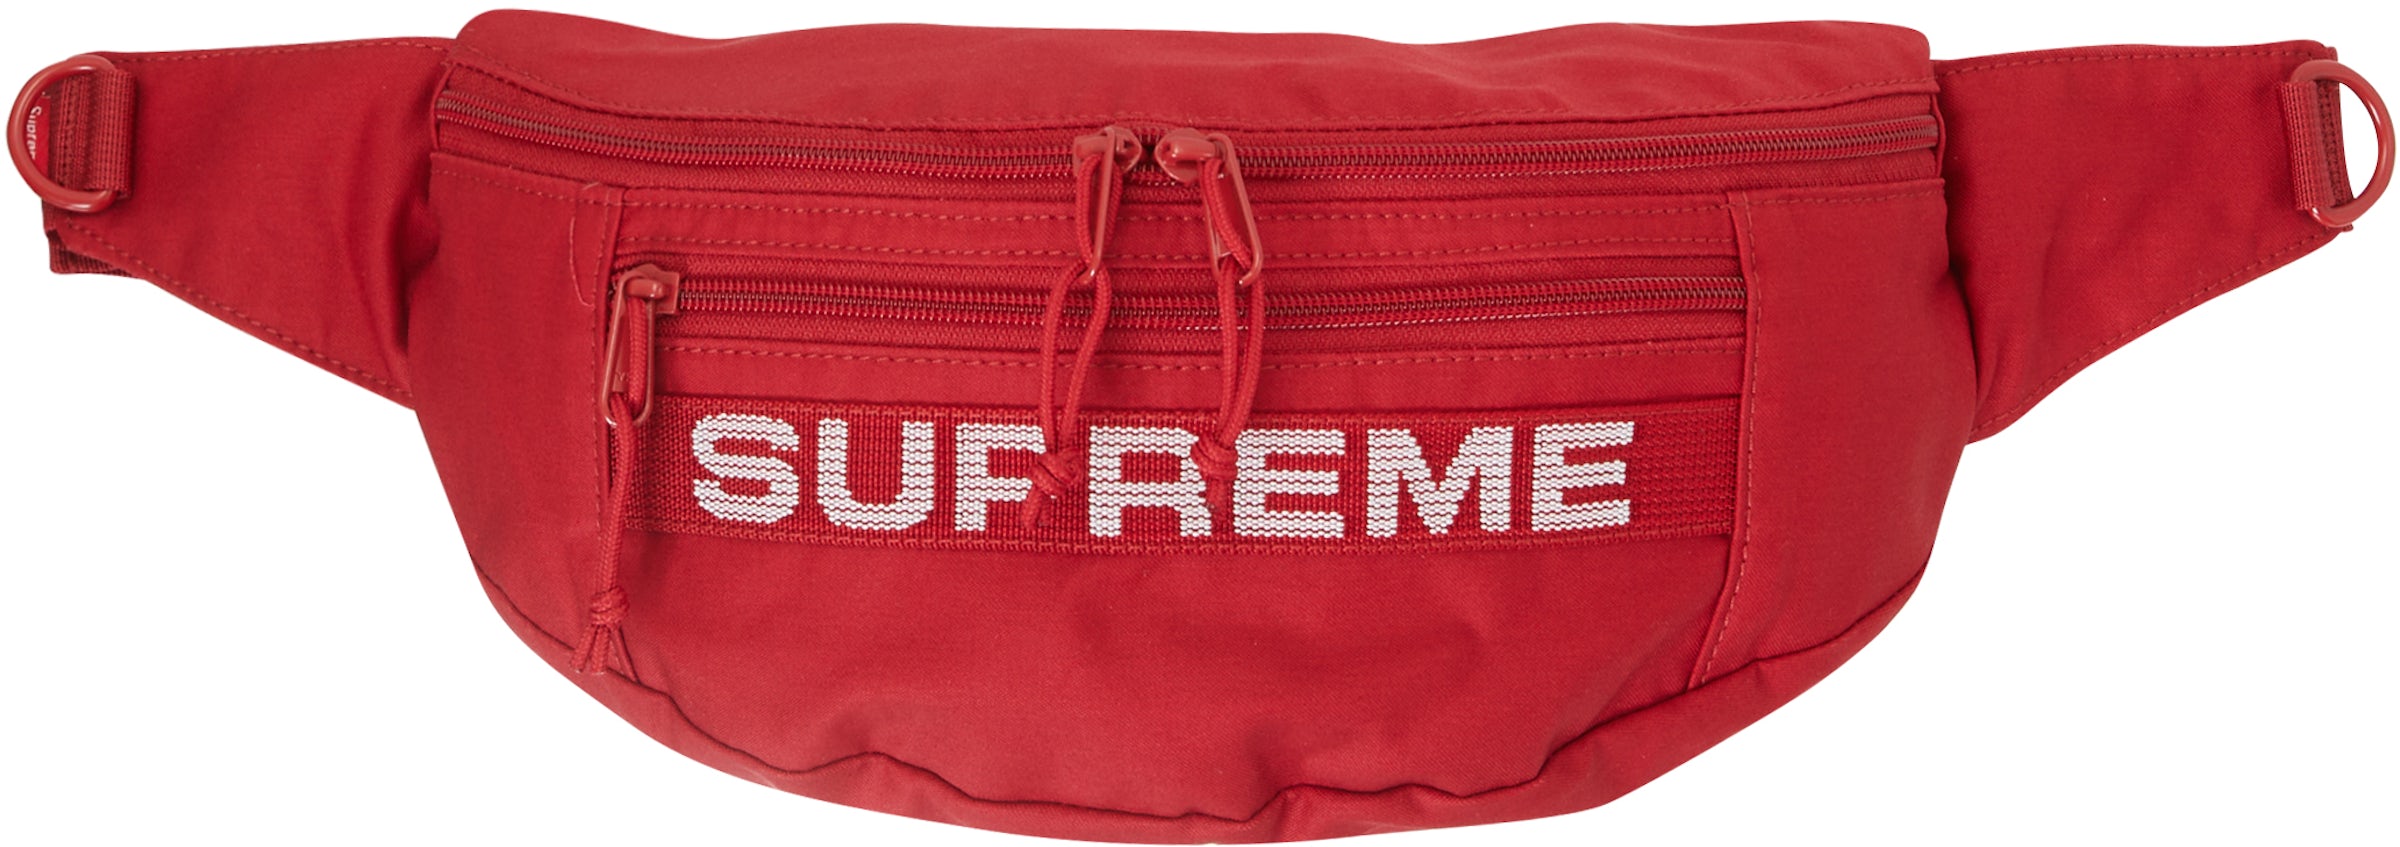 olive Waist Bag Supreme SS19 Fanny Pack Brand New With Tags